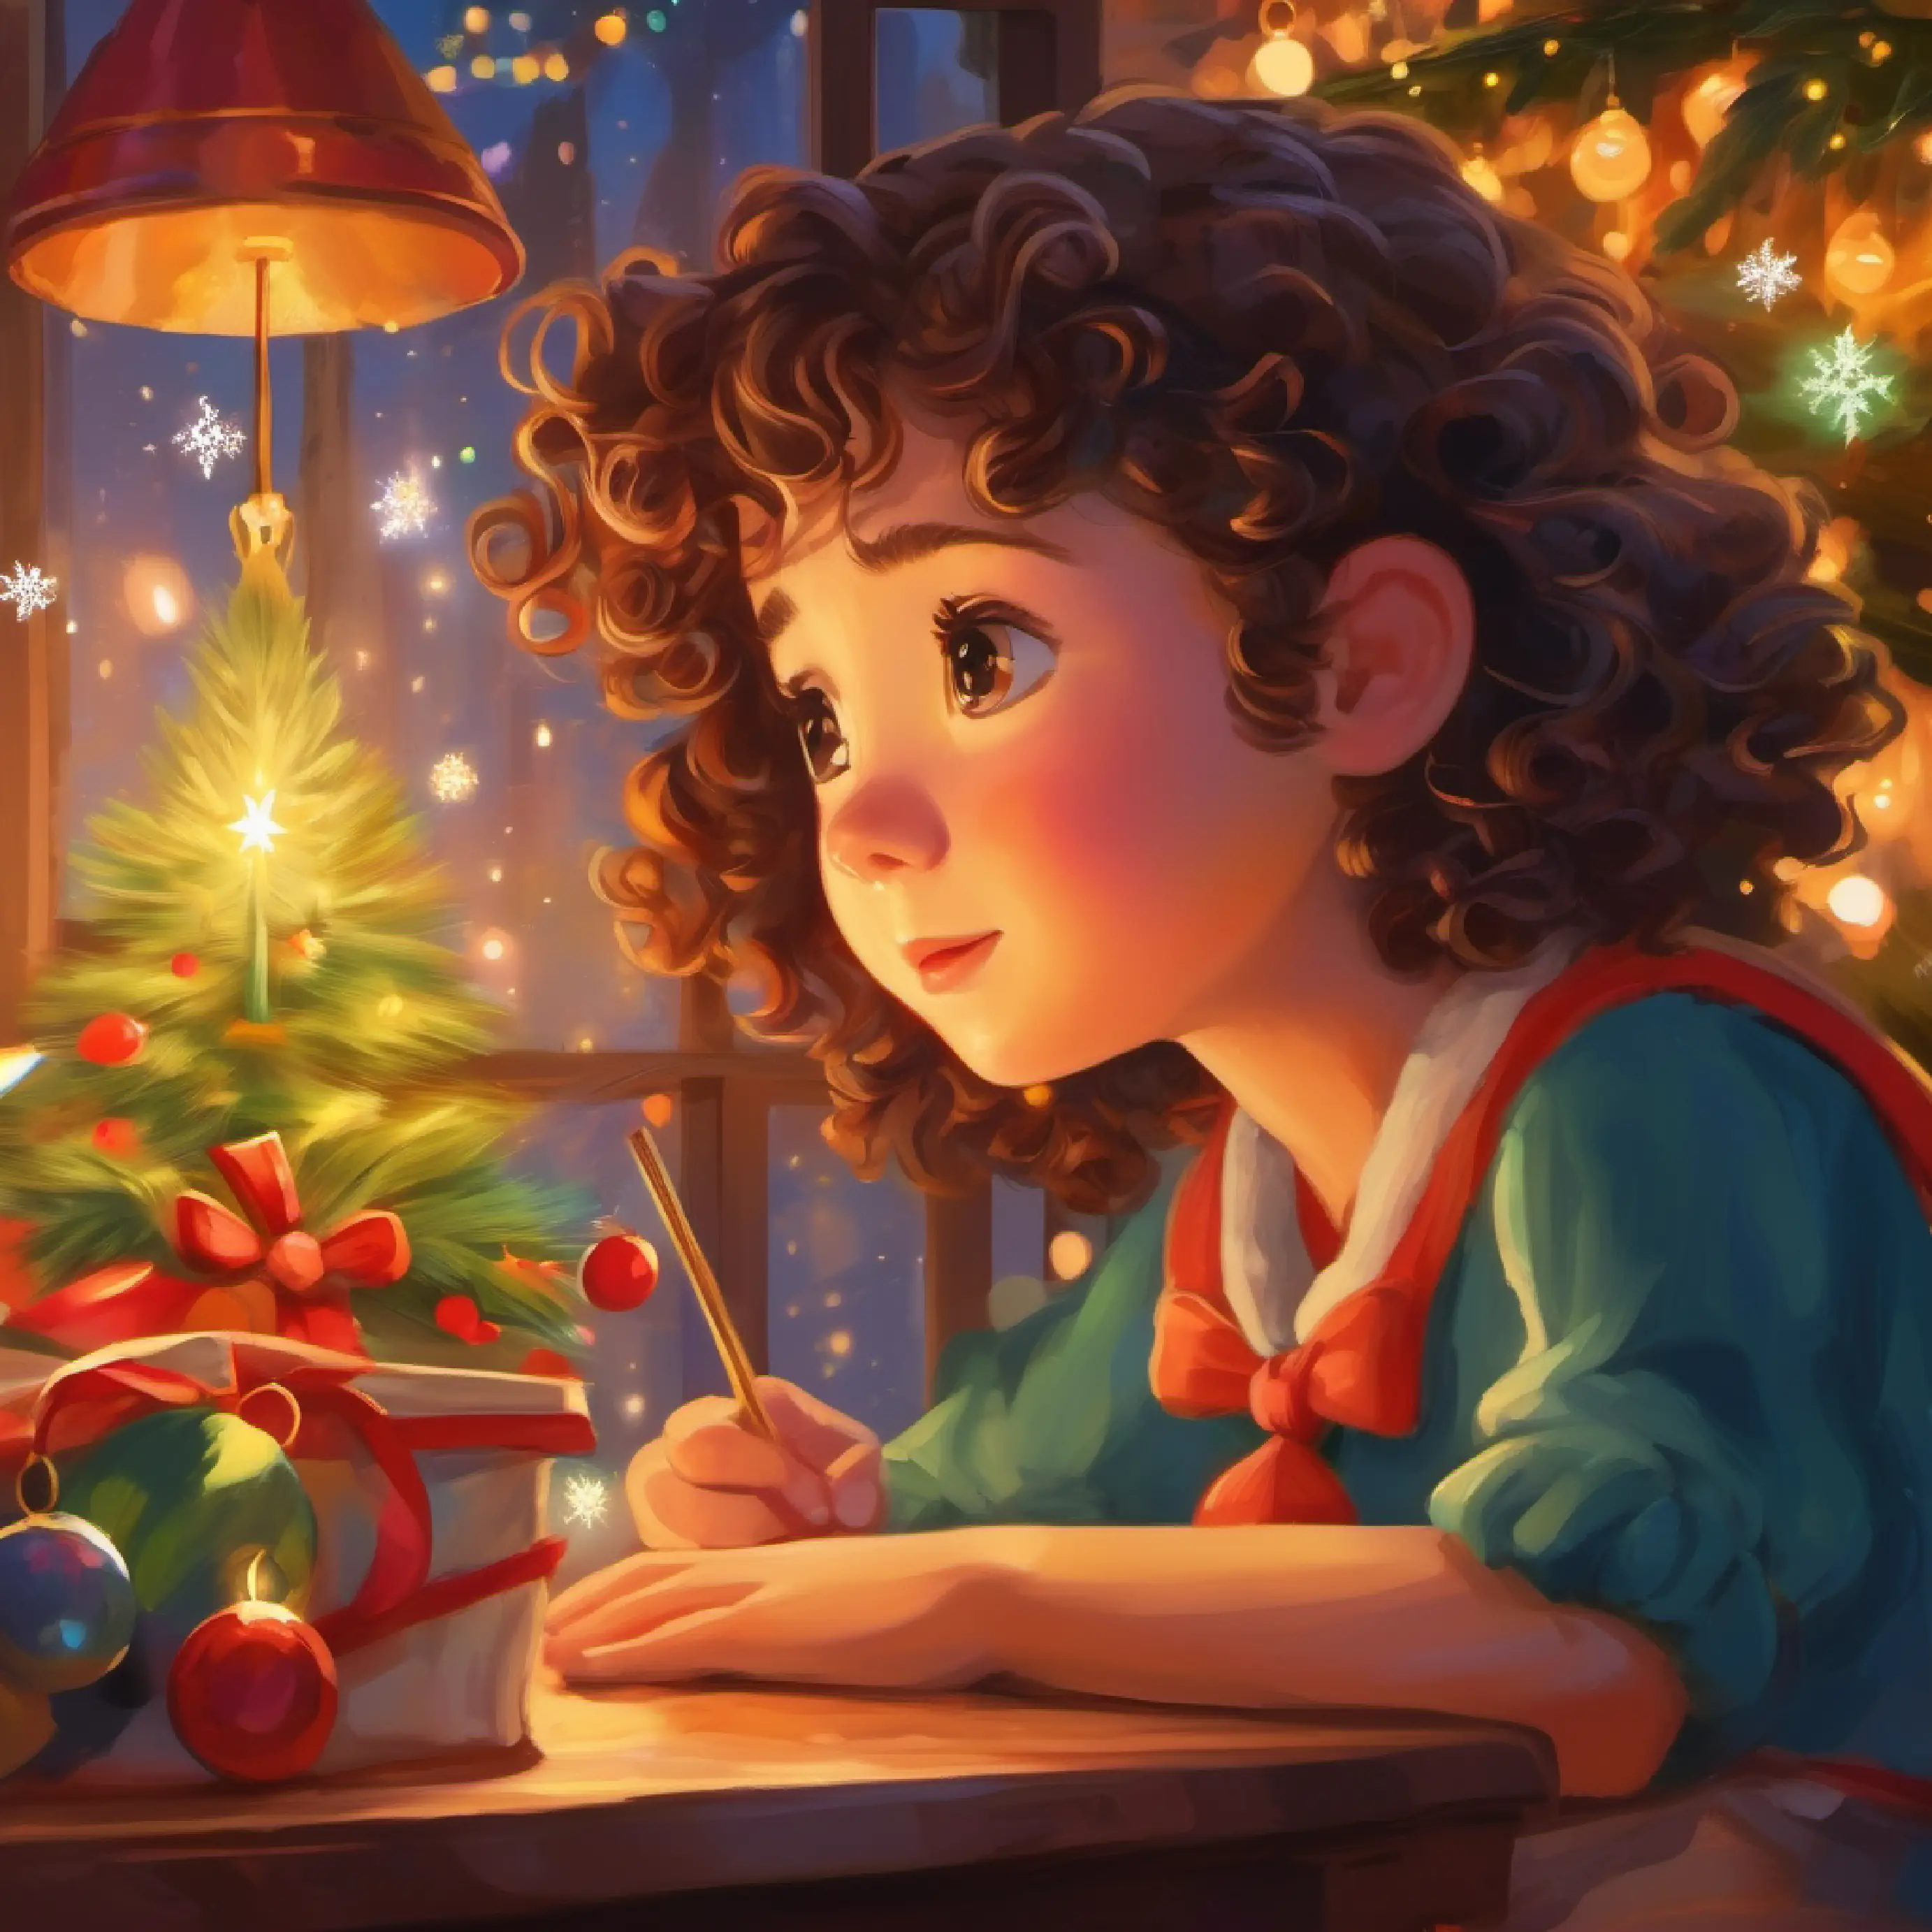 Curly-haired girl with amber eyes, spirited and dreamy's friends are moved by her dream movie's heartfelt ending.